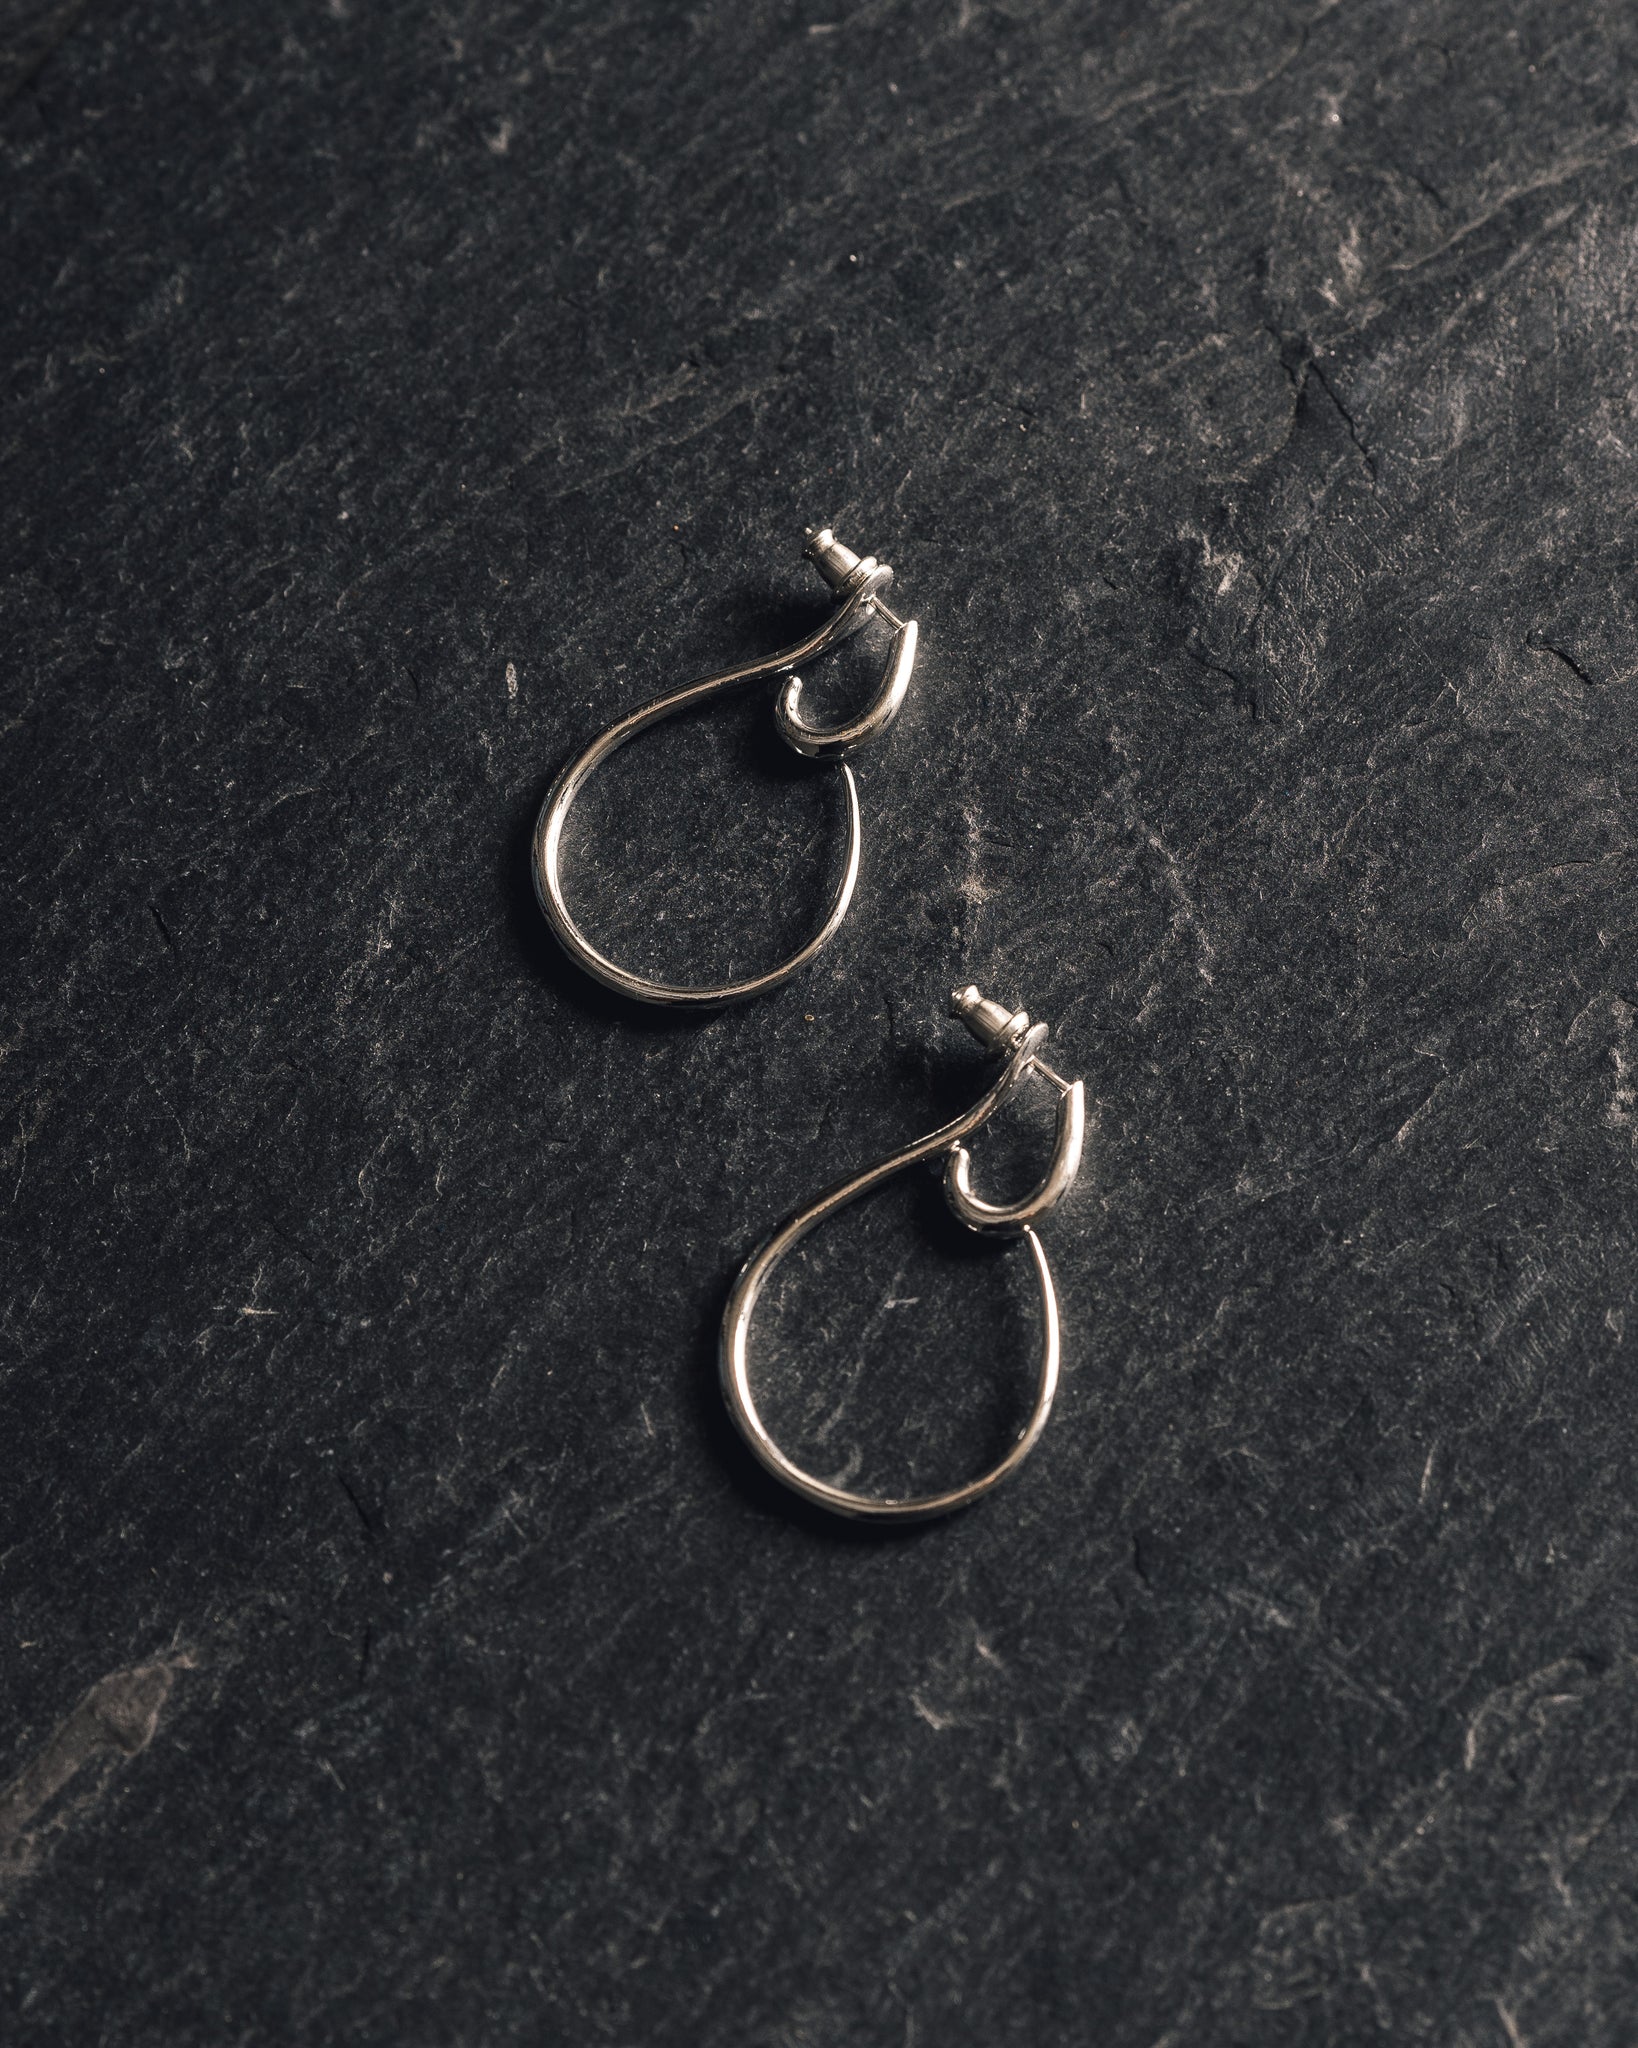 Knobbly Gal Hoops, Silver